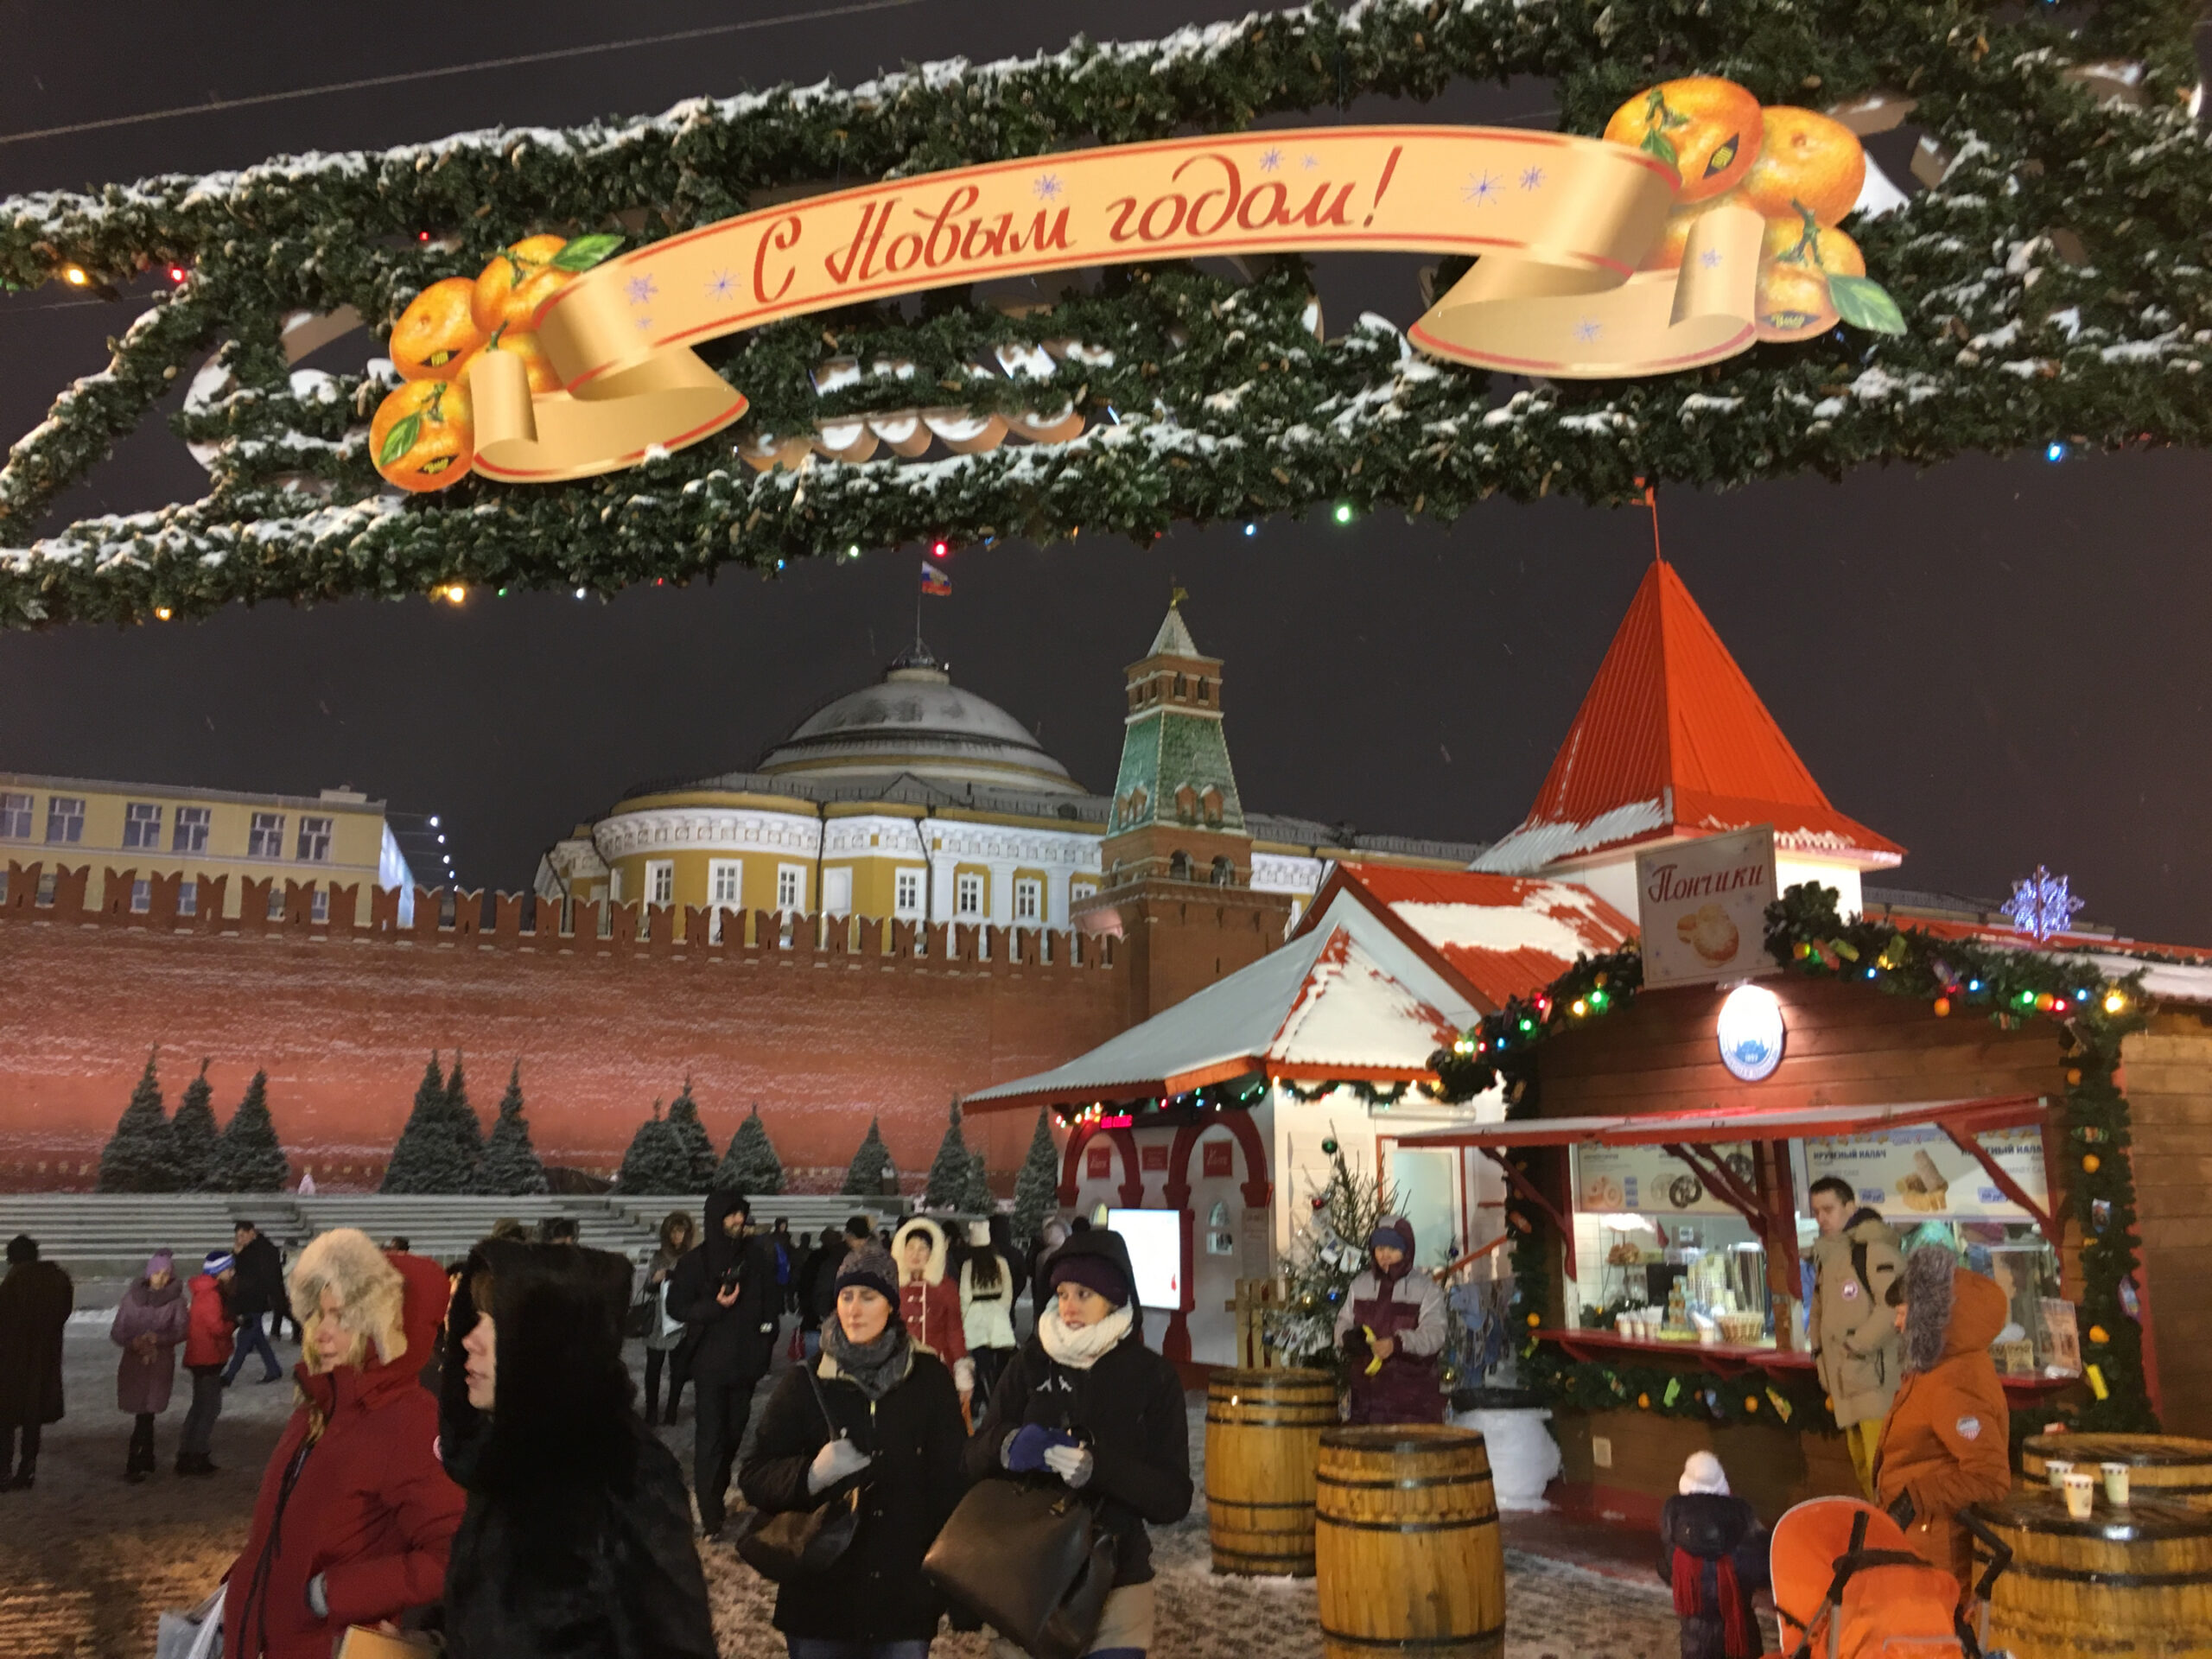 Snow falls over a Christmas market in Moscow's Red Square.